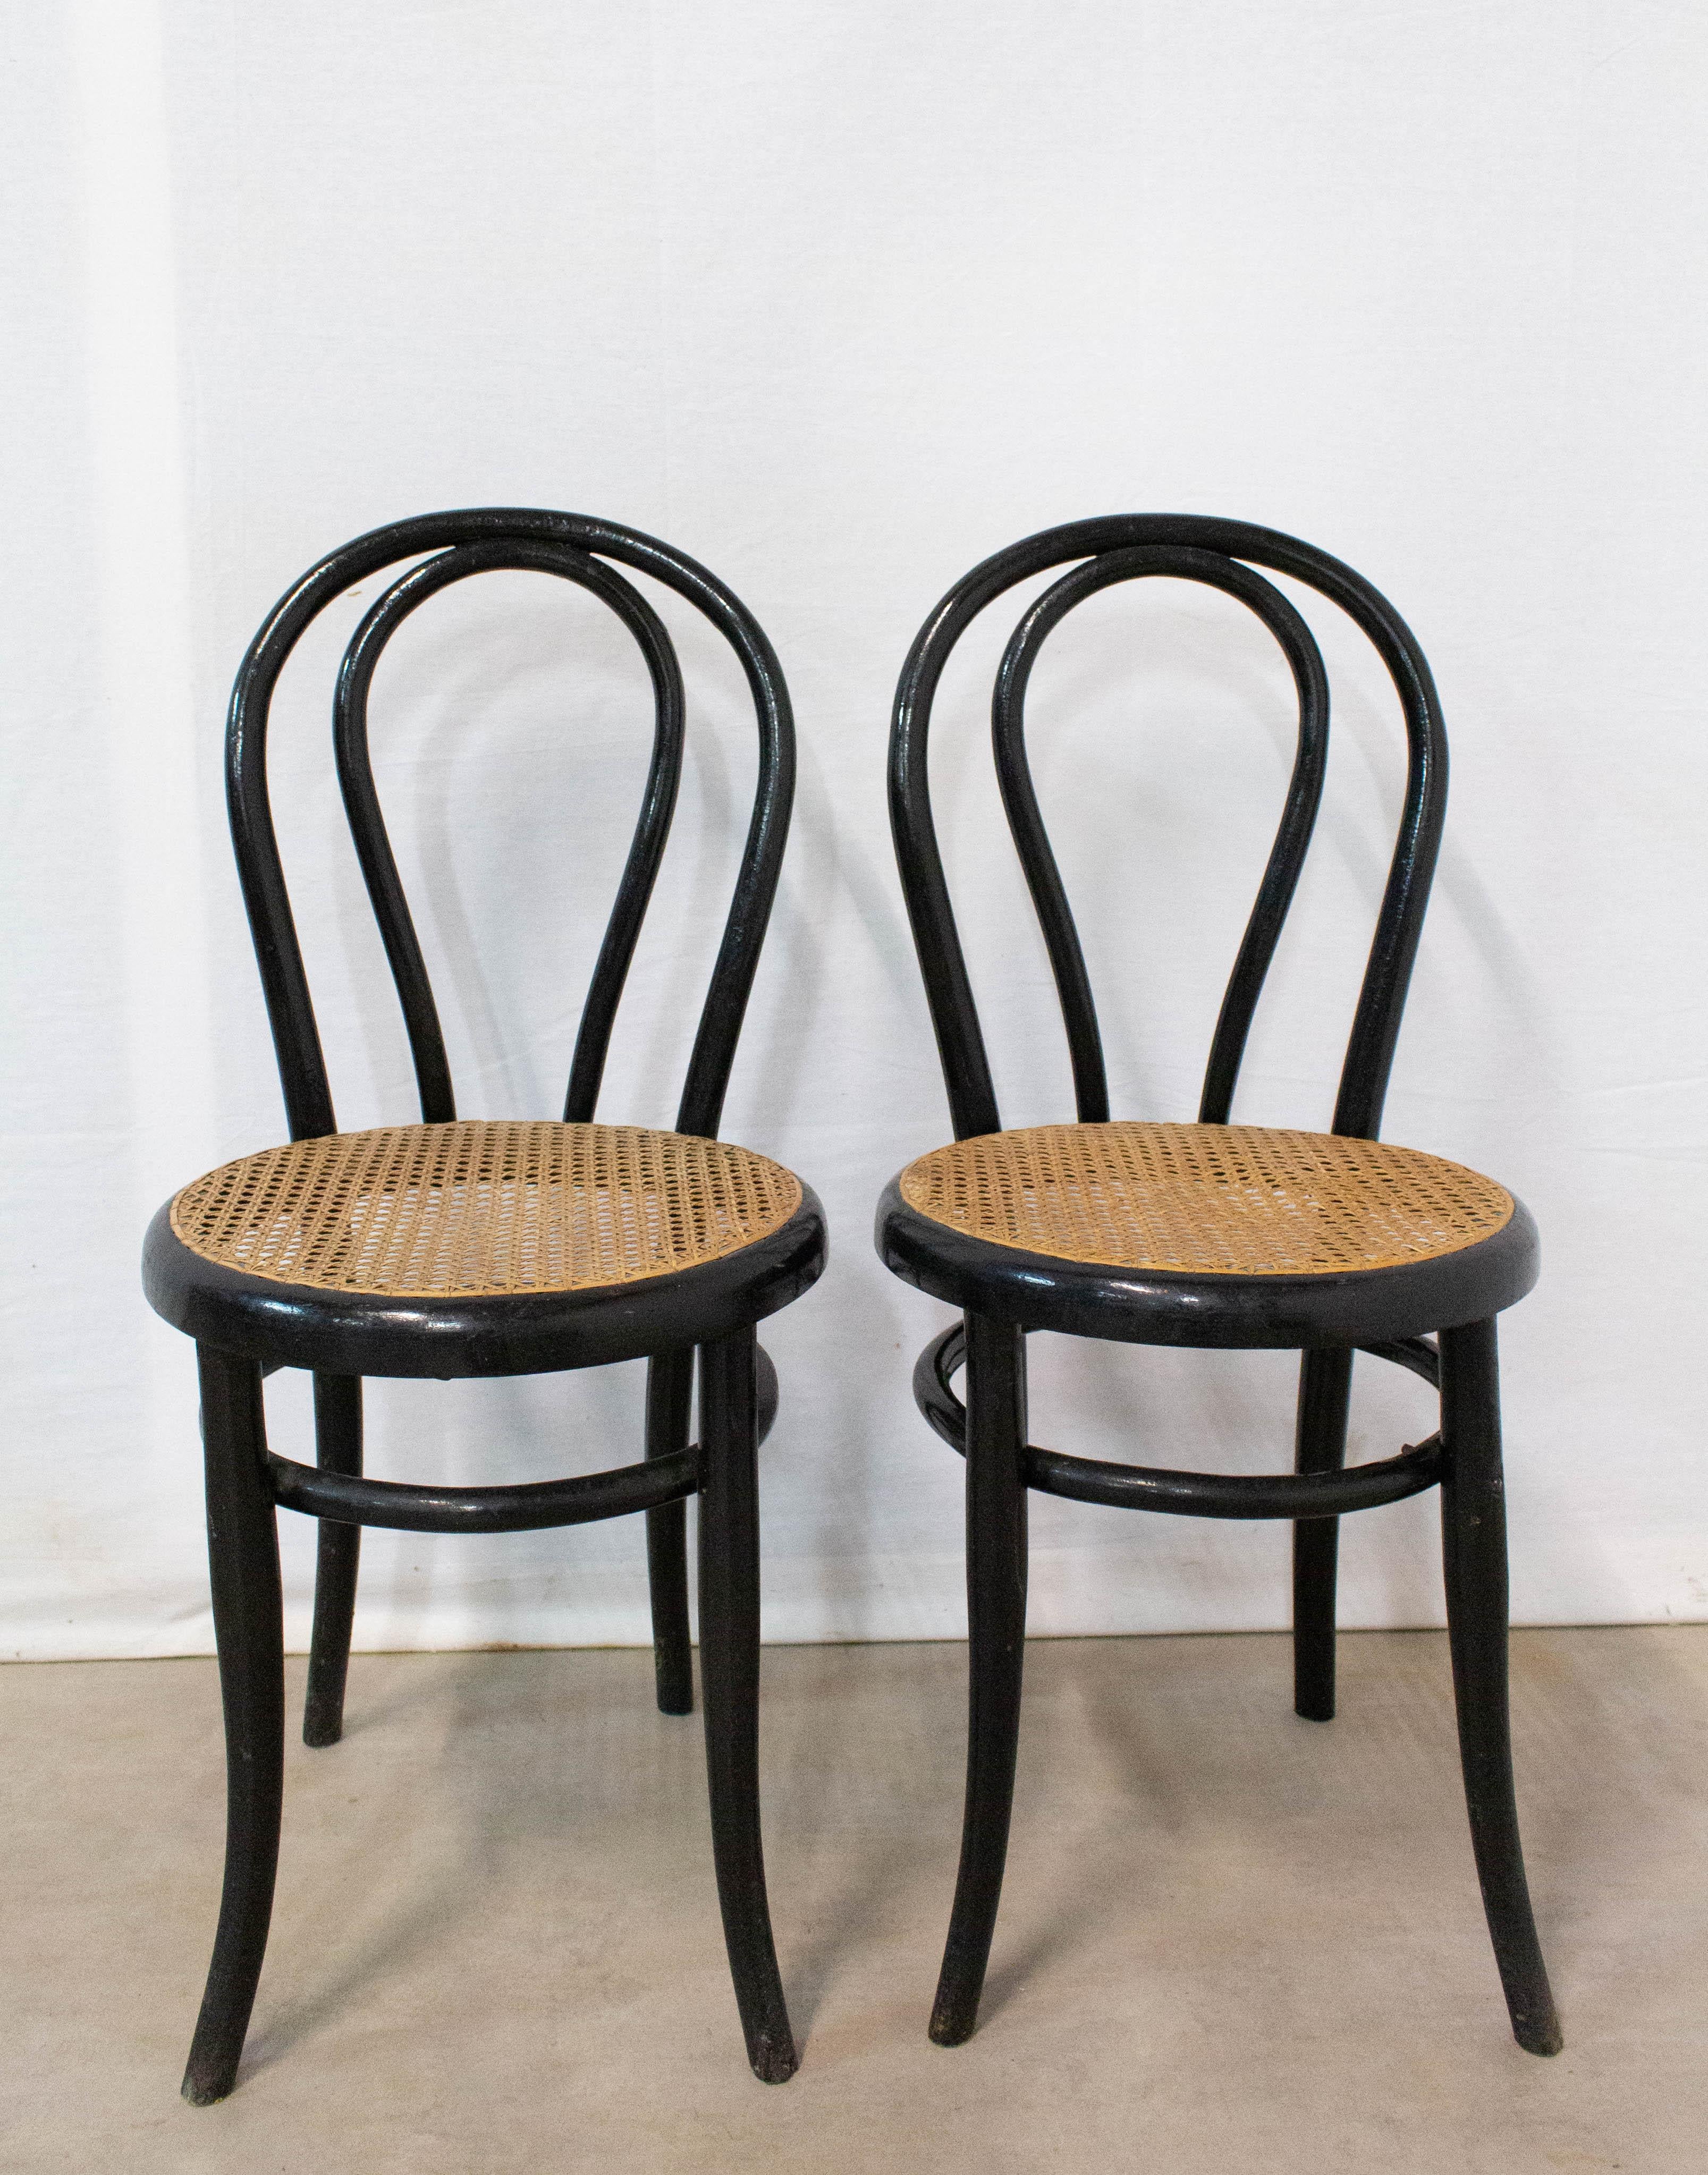 Pair of French Bistro dining chairs in the Fischel Thonet style, circa 1890
Two side or caned dining chairs
Original antique condition
Frames are sound and solid.
 
 